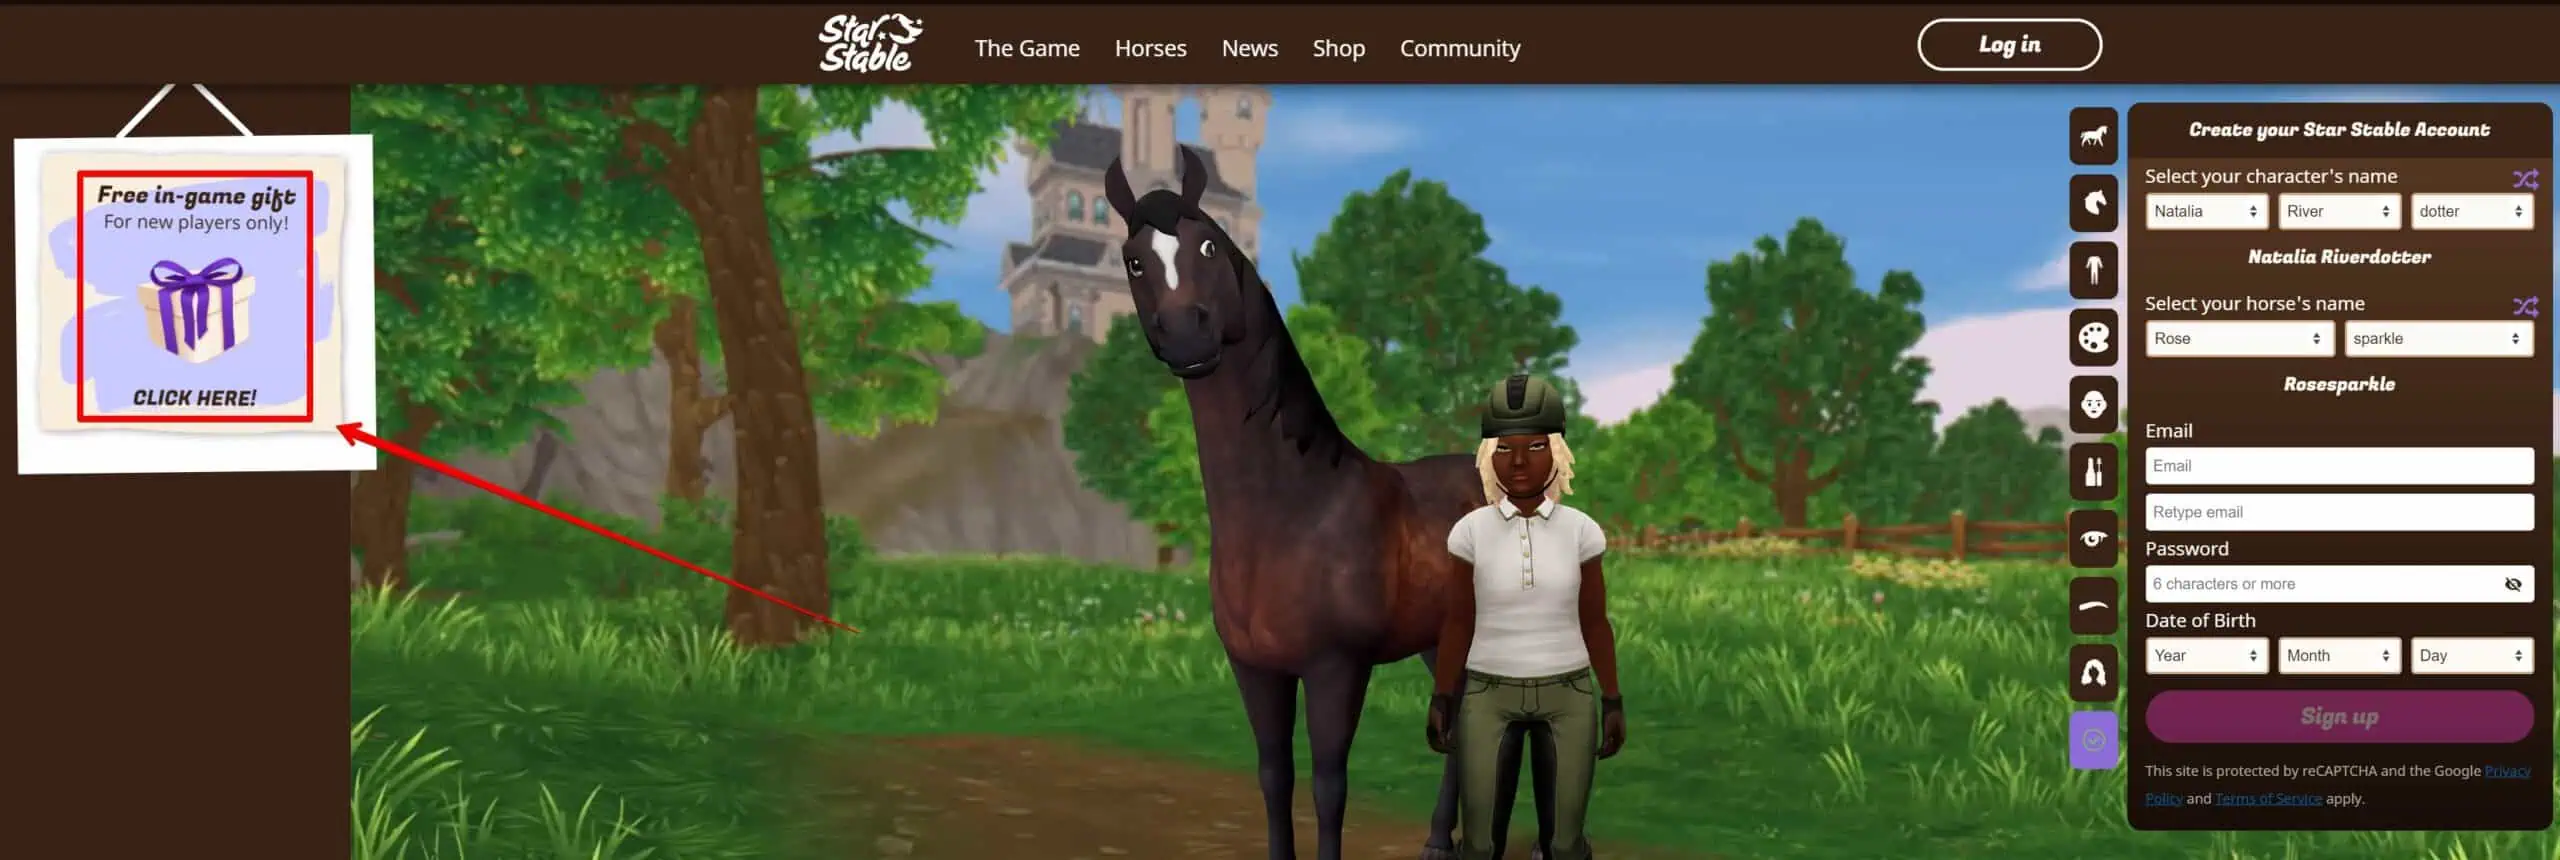 star stable gift box